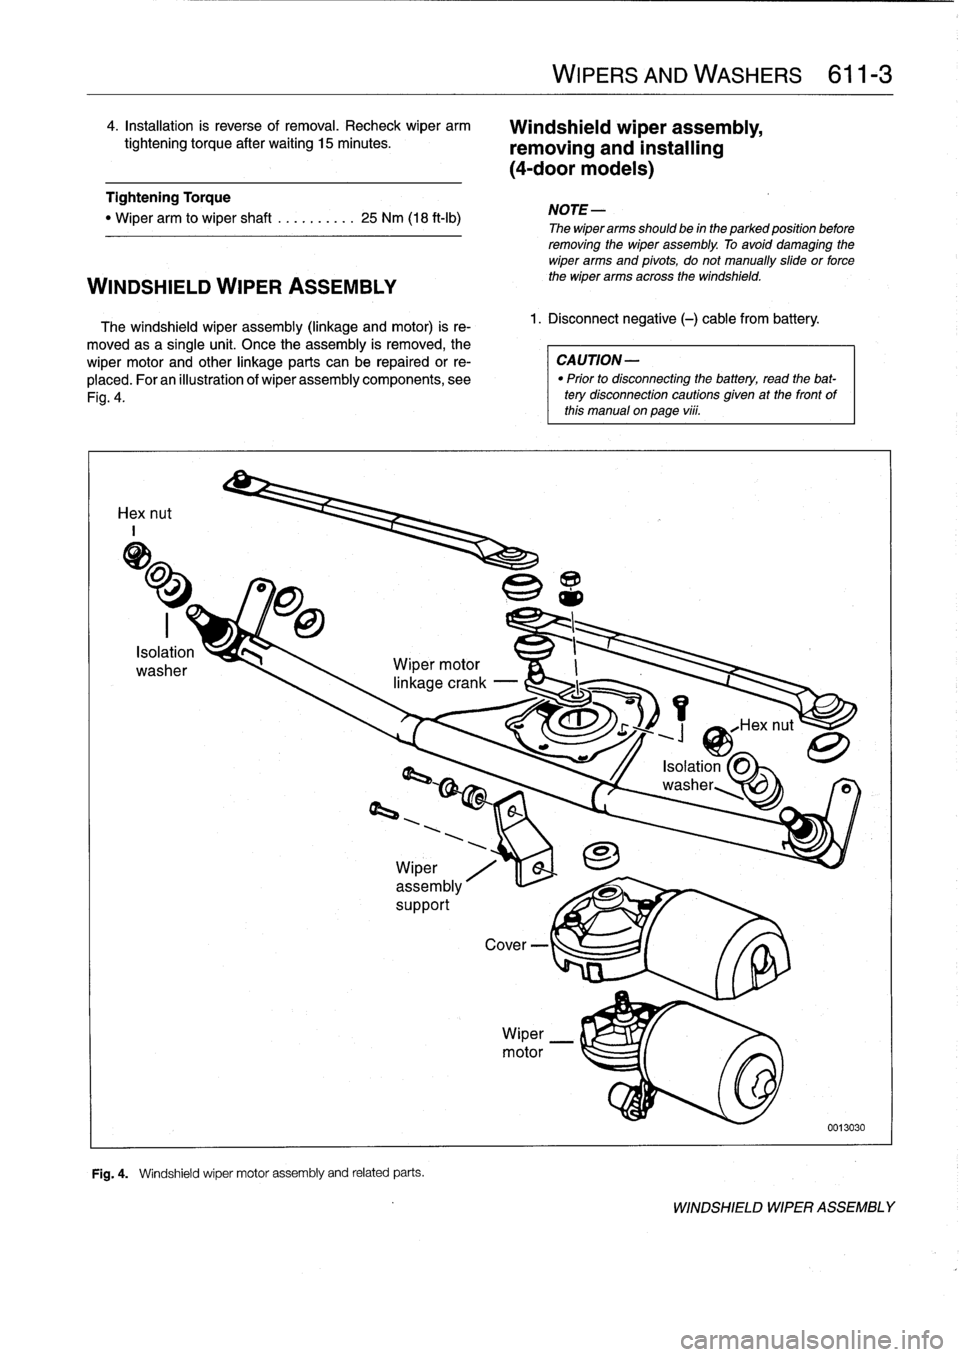 BMW 318i 1996 E36 Workshop Manual 
4
.
Installation
is
reverse
of
removal
.
Recheck
wiper
arm

tightening
torque
after
waiting
15minutes
.

Tightening
Torque

"
Wiper
arm
to
wiper
shaft
..........
25
Nm
(18
ft-Ib)

WINDSHIELD
WIPER
AS